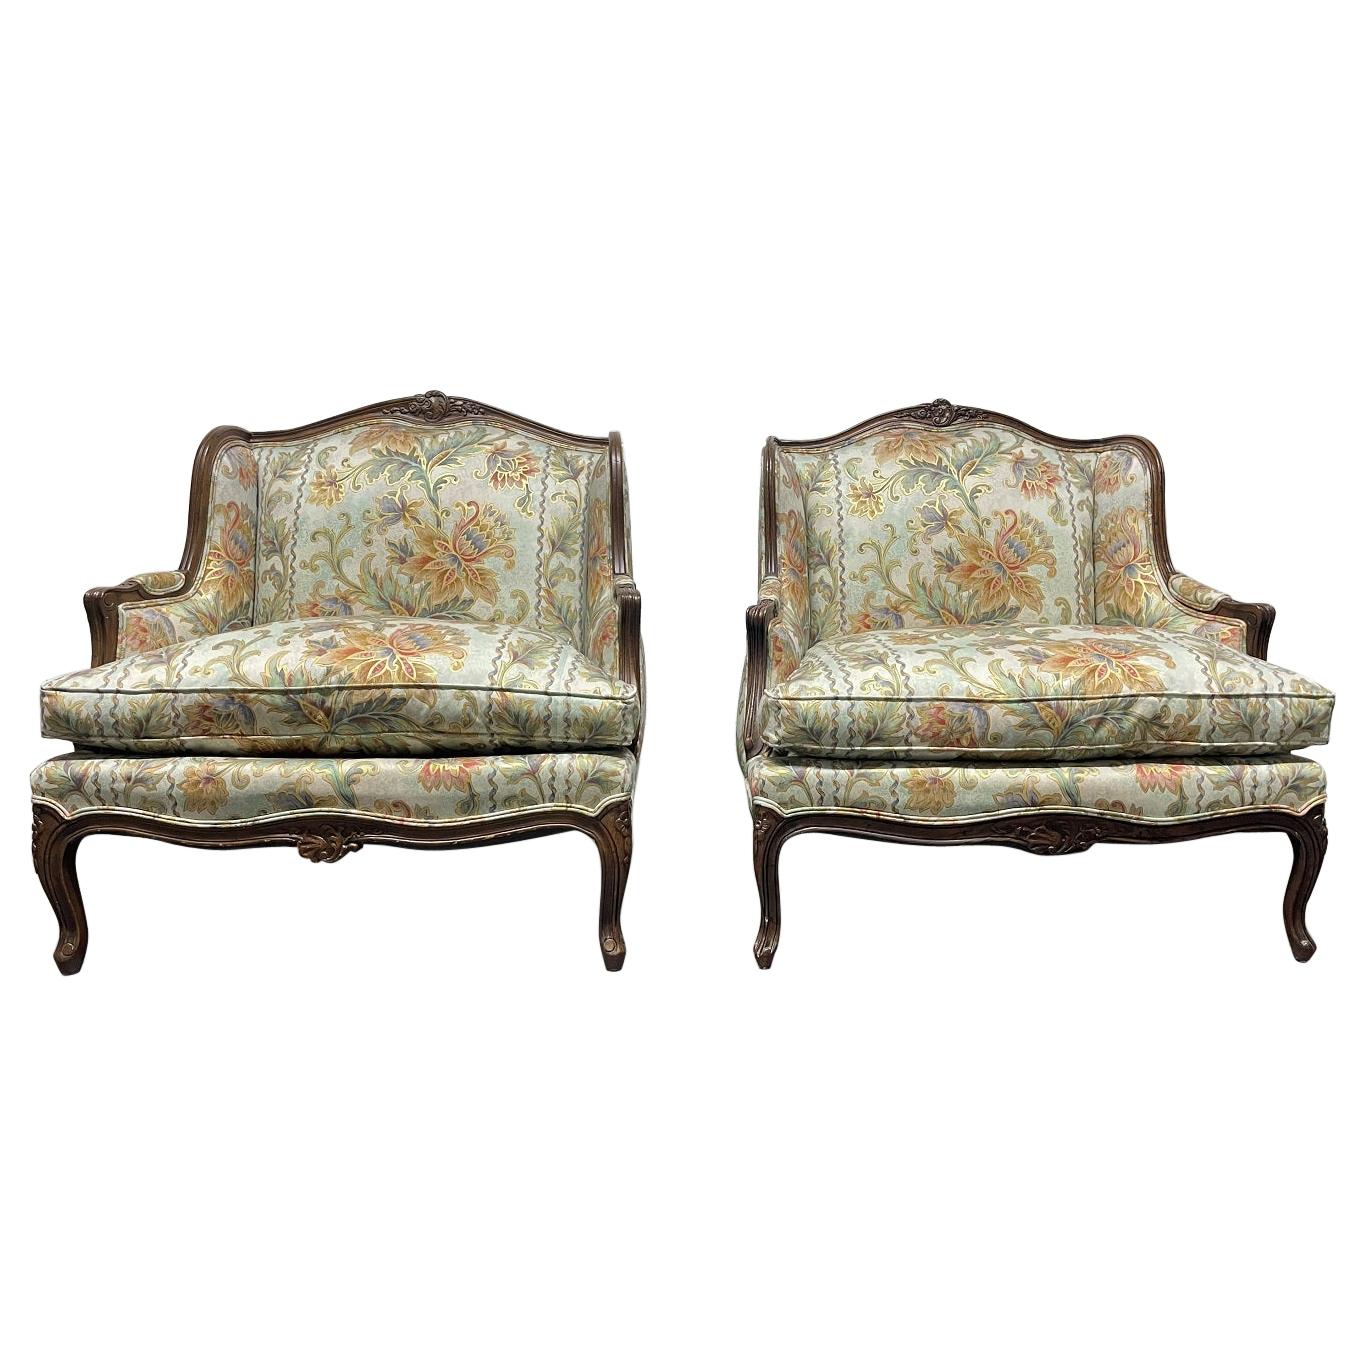 Pair Louis XIV Antique Style Oversized Chairs